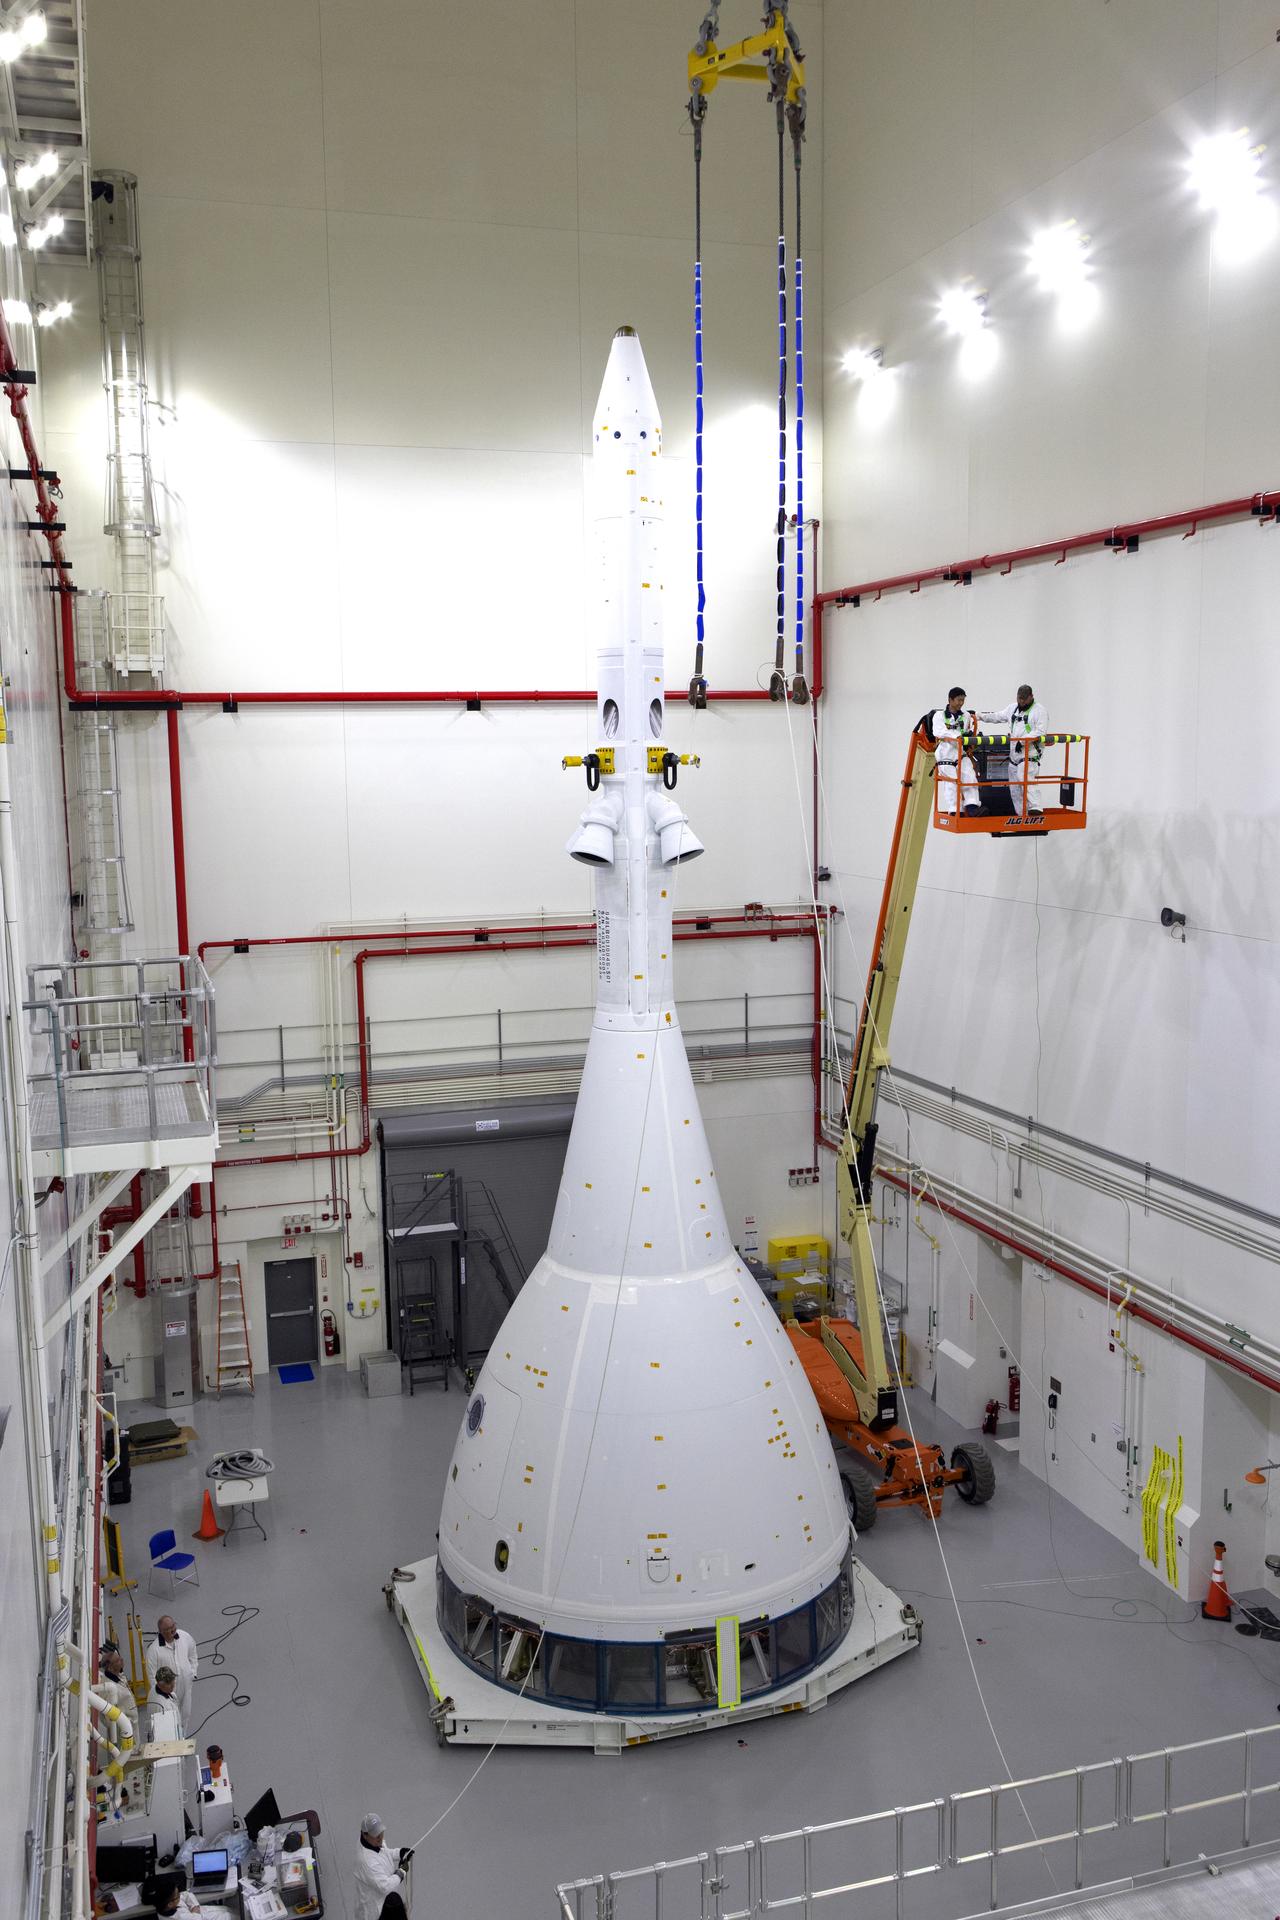 Workers complete the integration of the test version of Orion with the Launch Abort System for AA-2 inside the LASF on May 18.